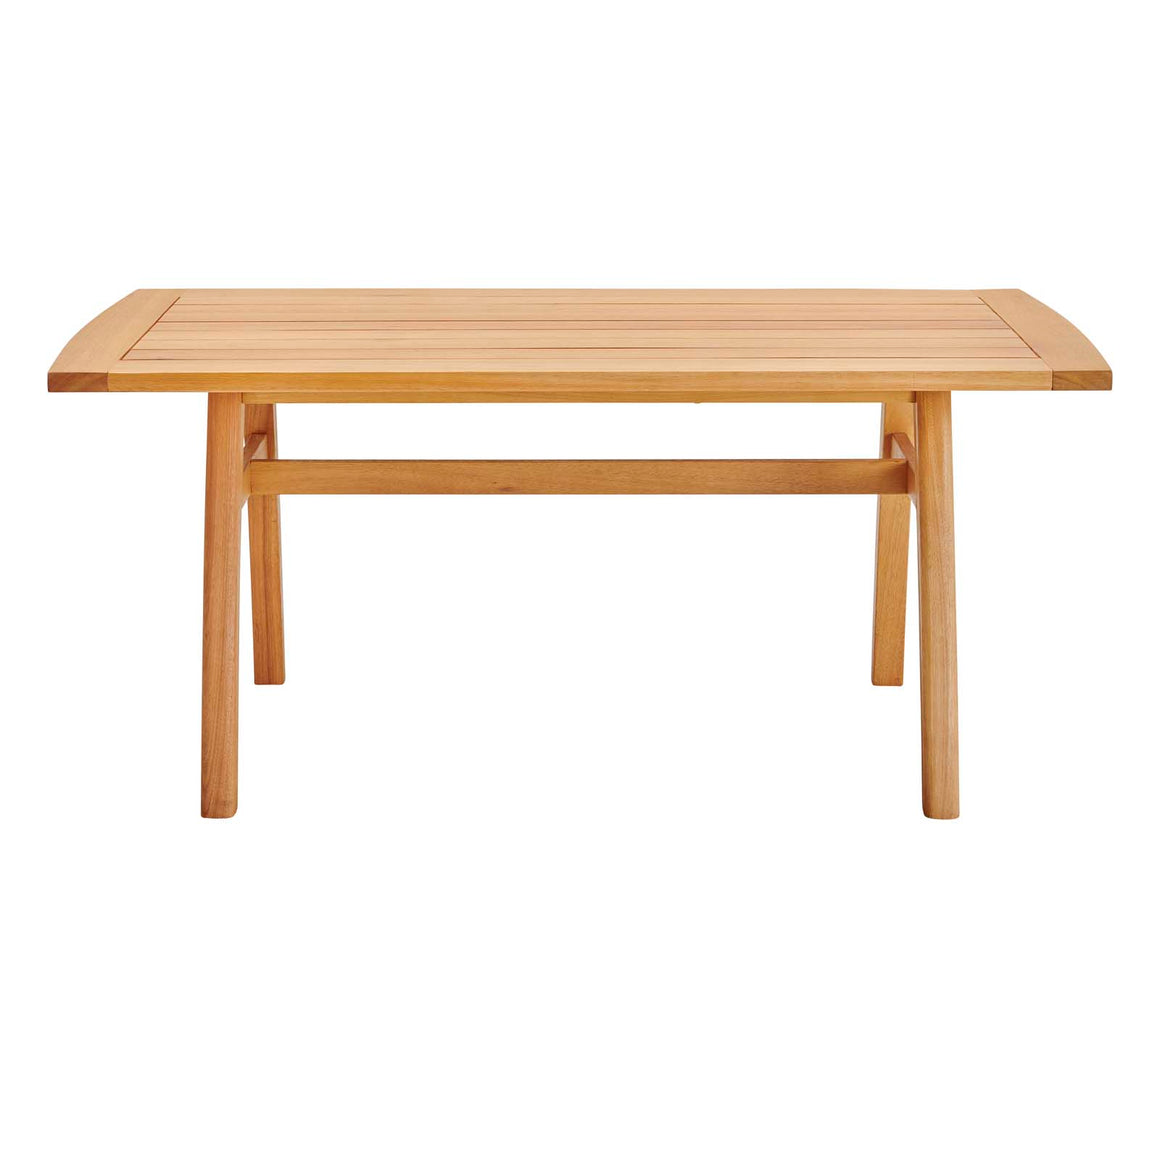 Orlean 57" Outdoor Patio Eucalyptus Wood Dining Table Natural